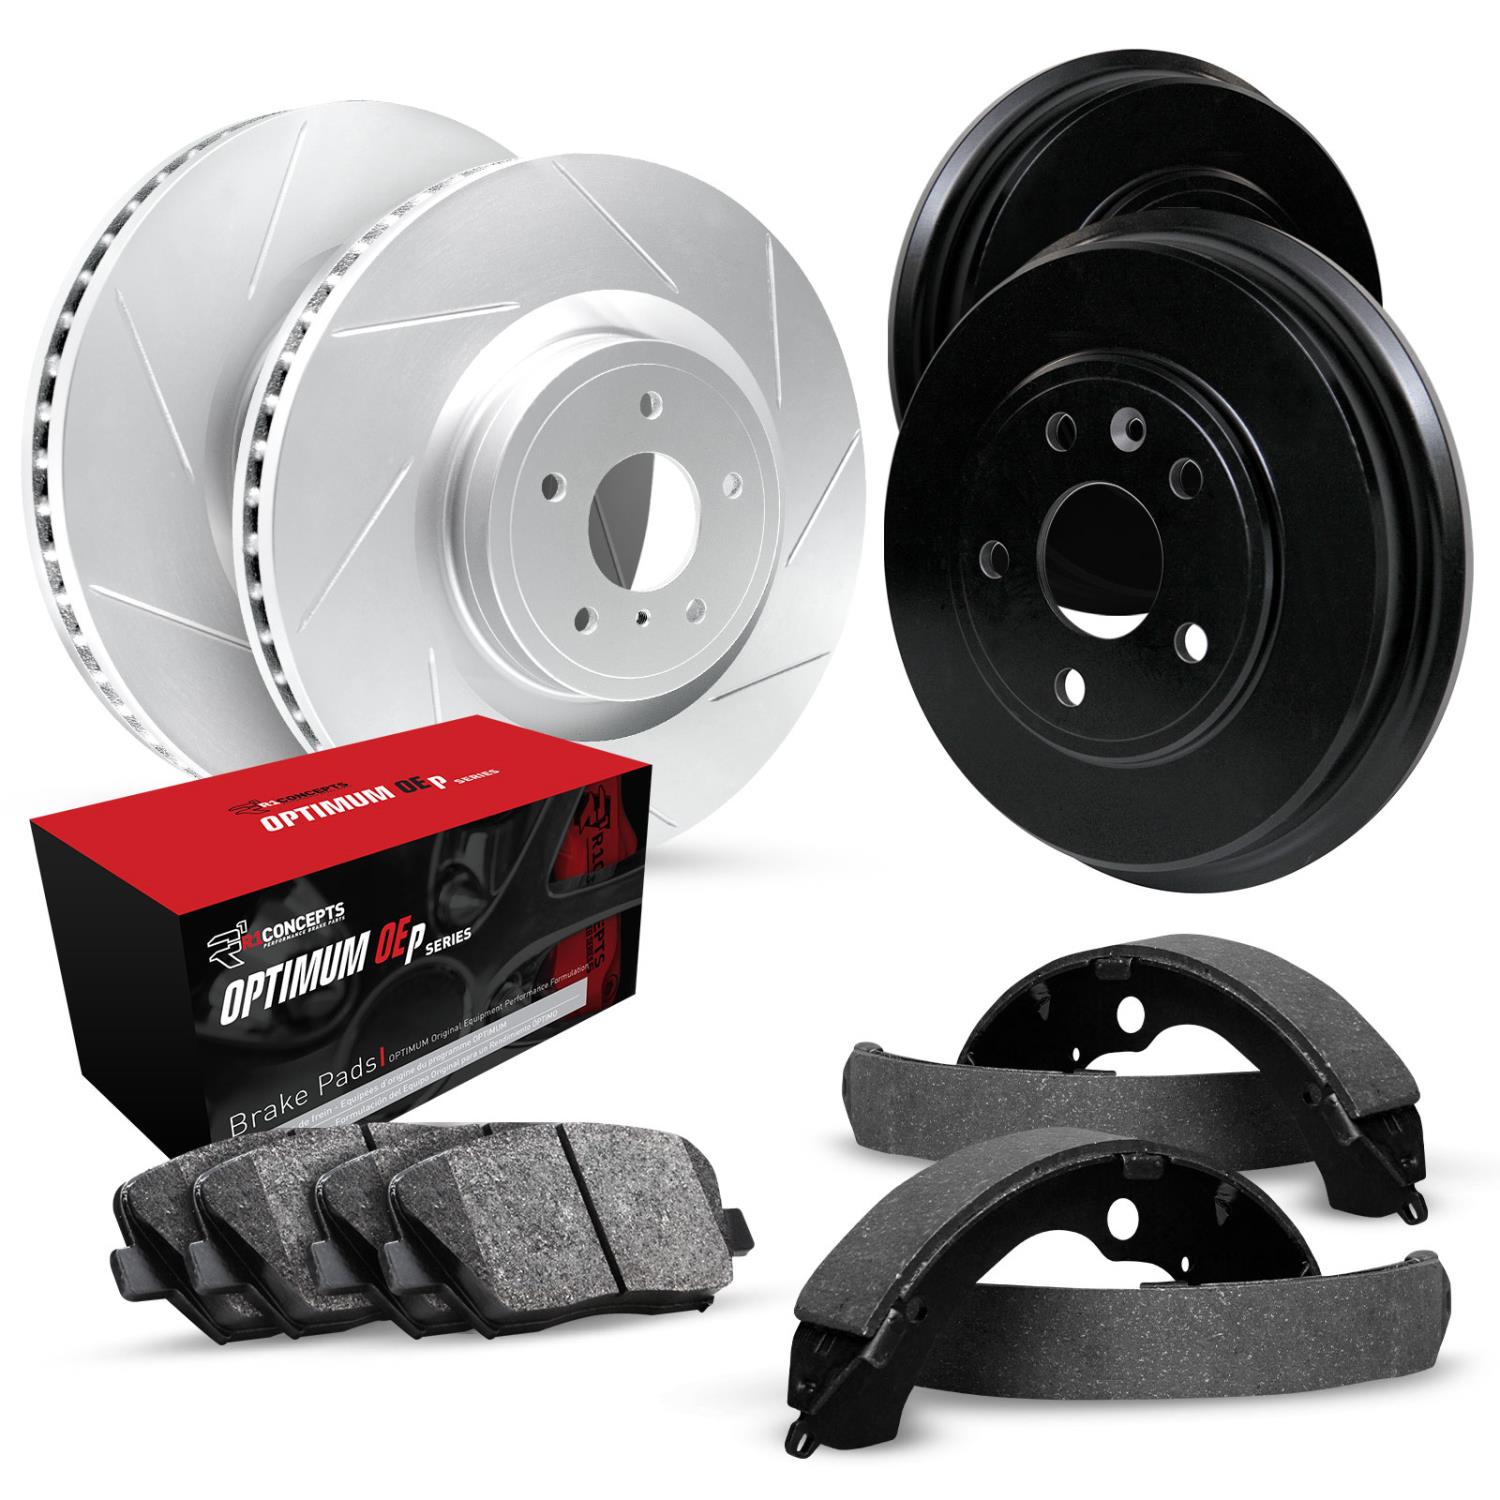 GEO-Carbon Slotted Brake Rotor & Drum Set w/Optimum OE Pads & Shoes, 1979-1991 GM, Position: Front & Rear